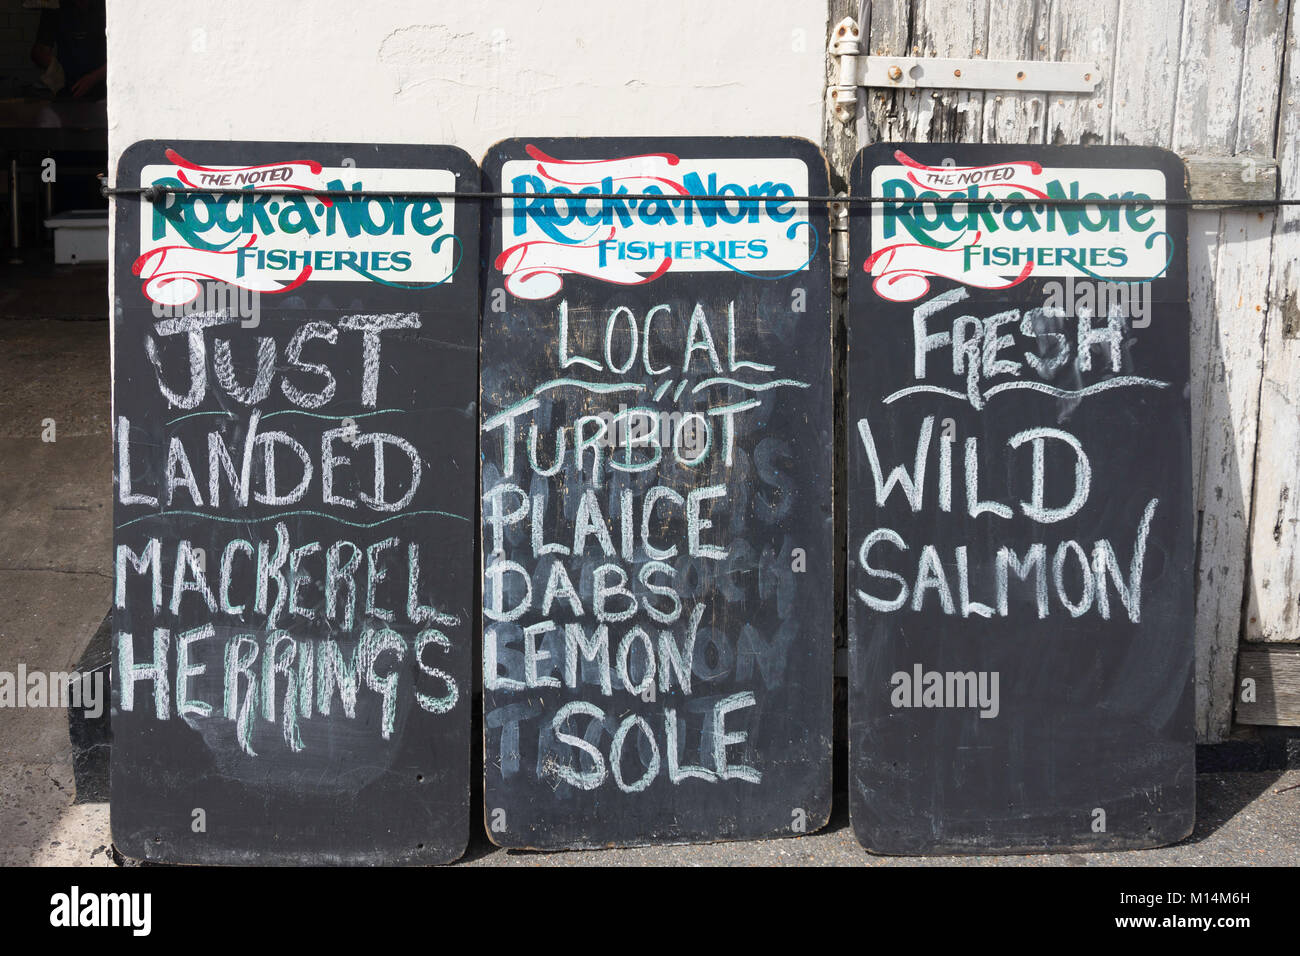 Rock-a -poissons Pêches Nore availabity boards, vieille ville de Hastings, Rock-a-Nore Road, Hastings, East Sussex, Angleterre, Royaume-Uni Banque D'Images